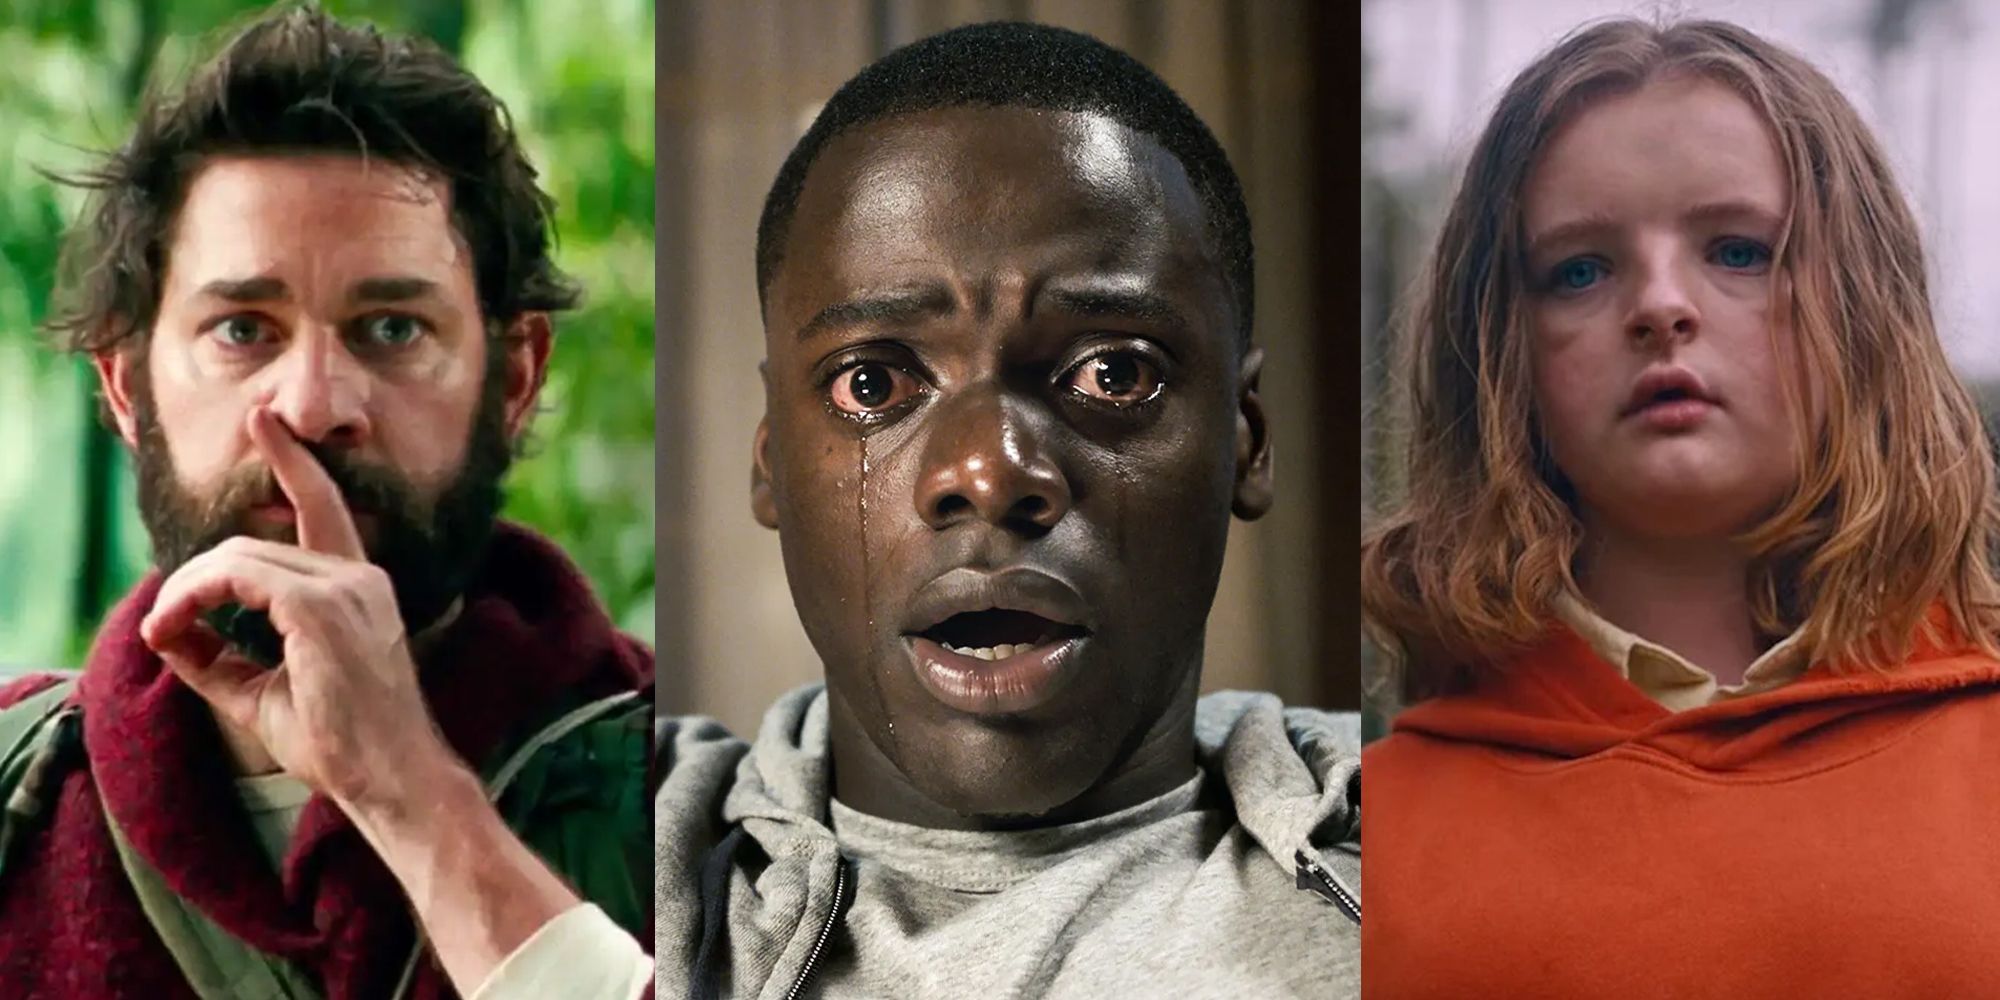 A collage of John Krasinski with his finger to his lips in A Quiet Place, Daniel Kaluuya crying in Get Out and Milly Shapiro outside in Hereditary